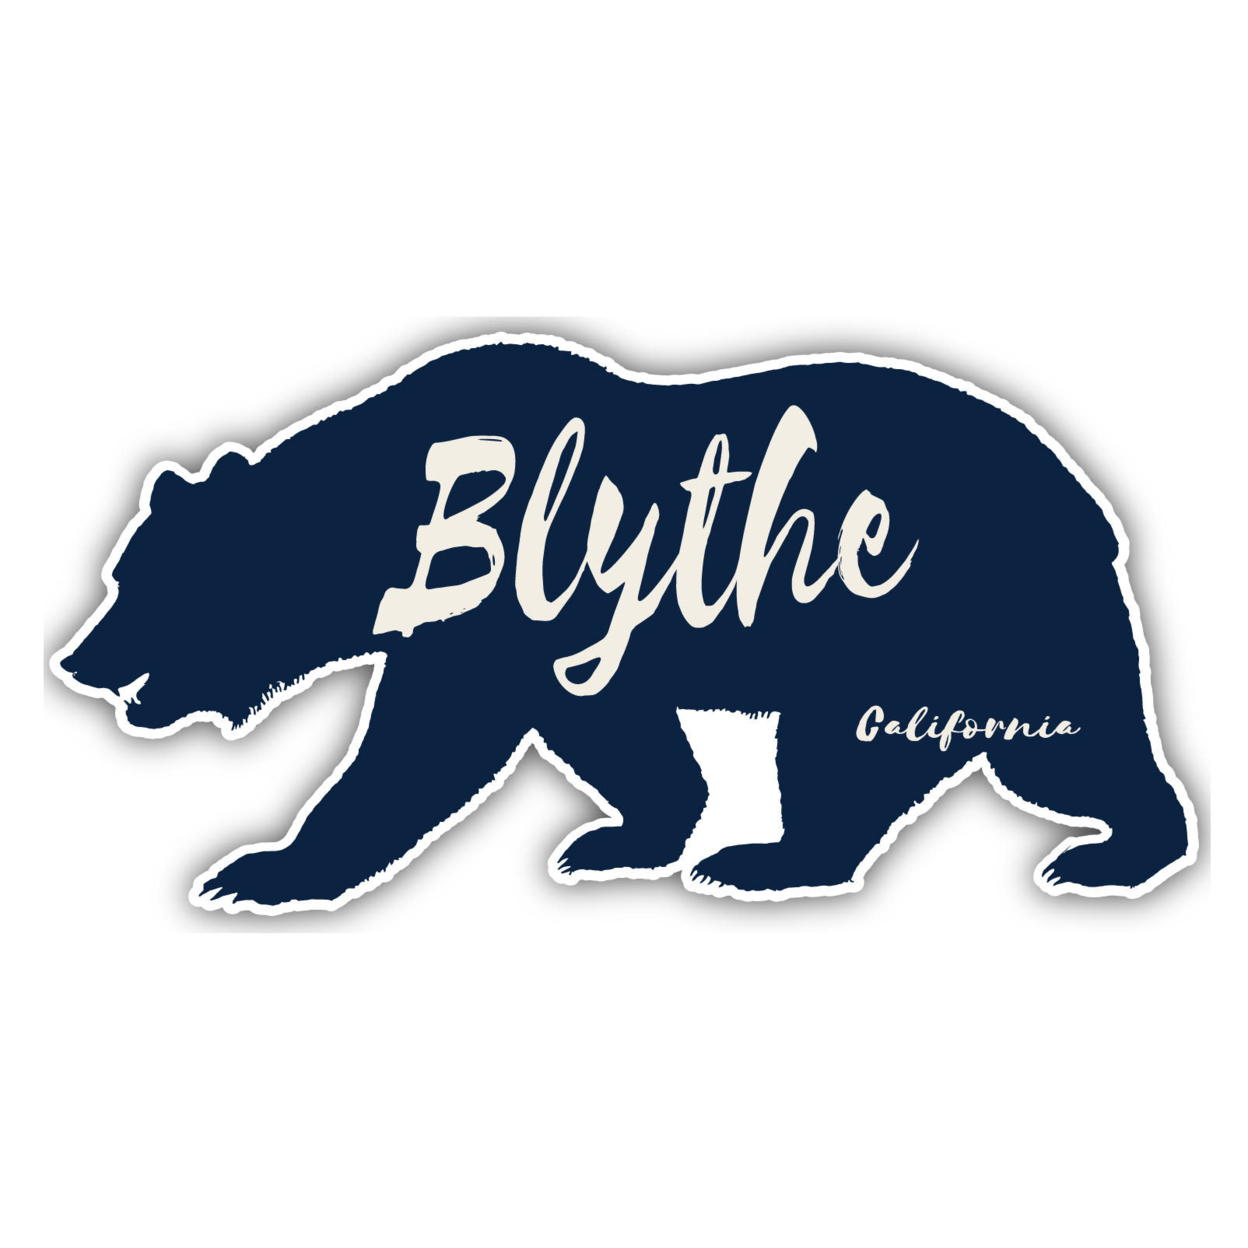 Blythe California Souvenir Decorative Stickers (Choose Theme And Size) - 4-Pack, 6-Inch, Great Outdoors